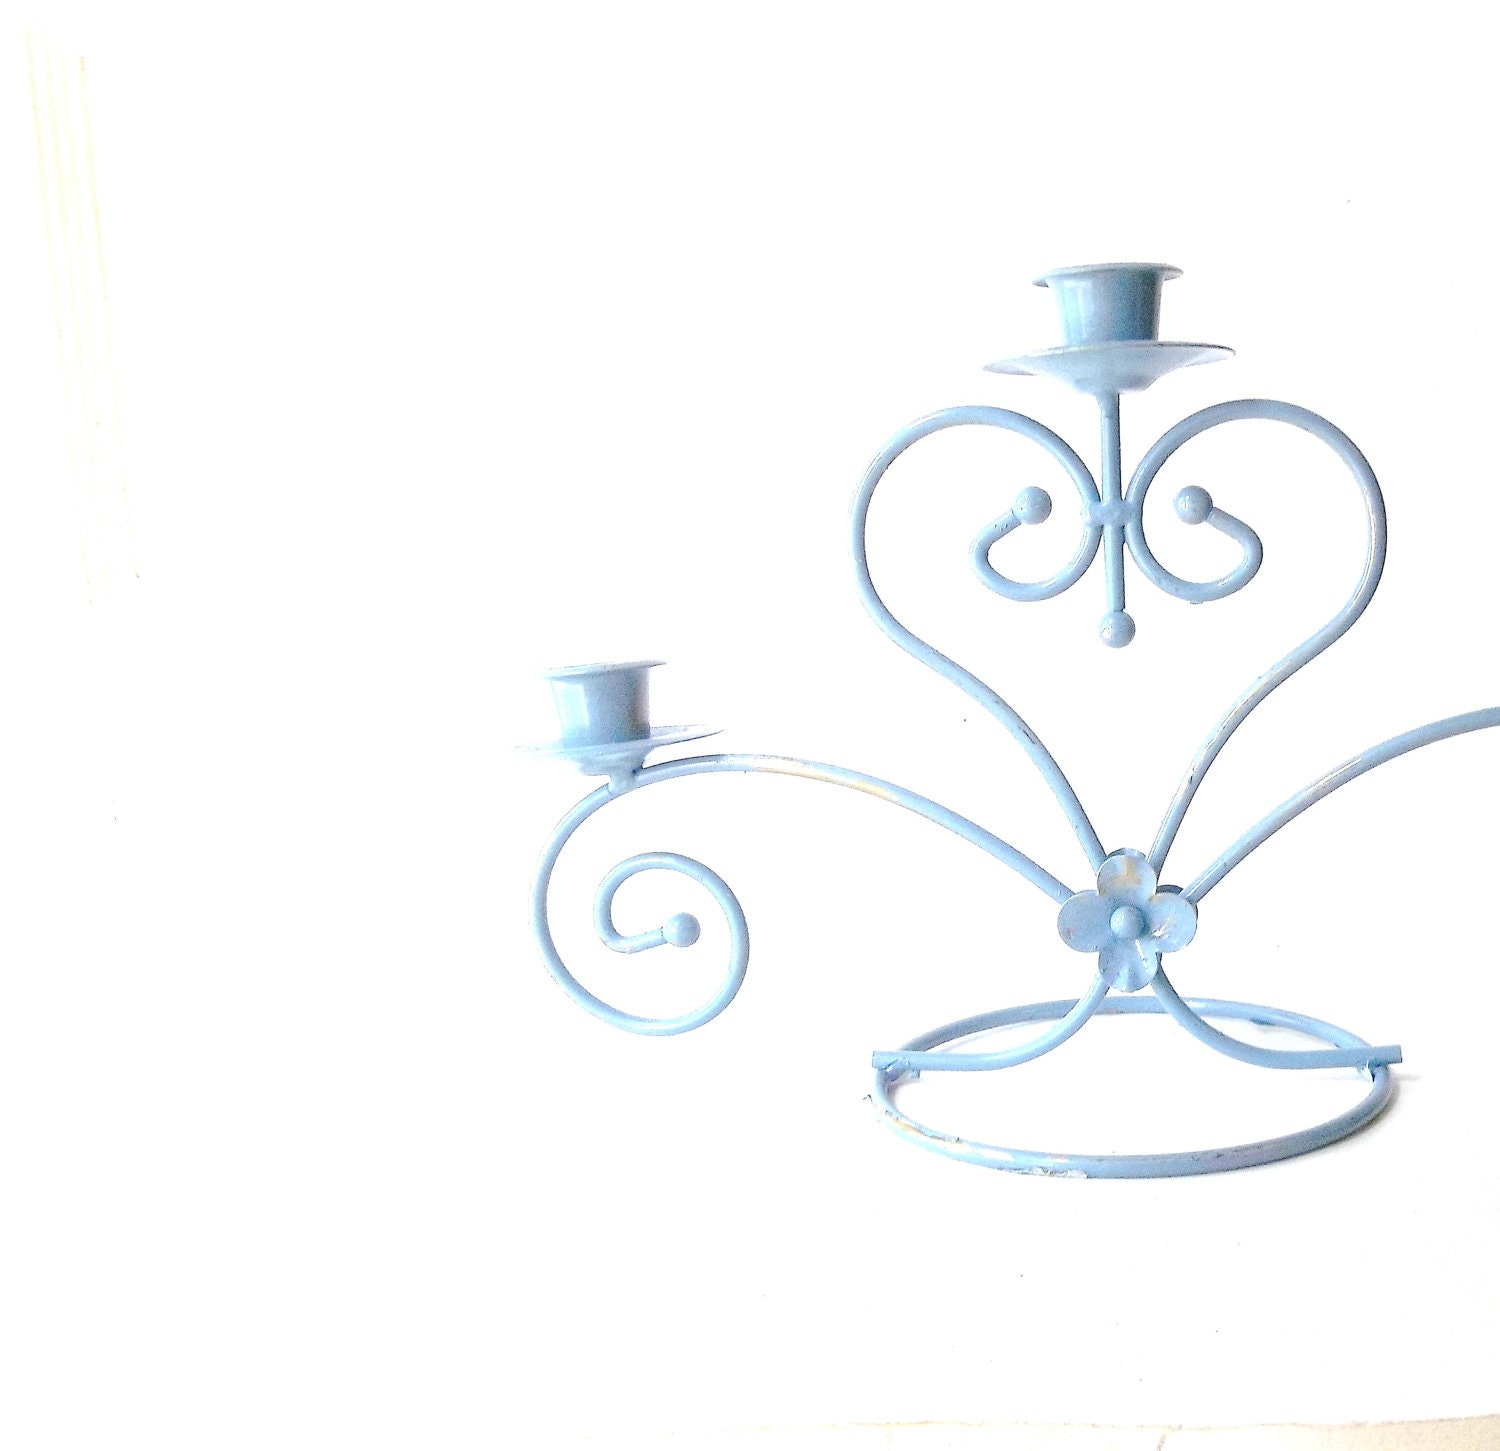 Vintage Candlelabra. CandleHolder. French Shabby Chic Blue. Wrought Iron Metal Heart. Cottage Chic Decor